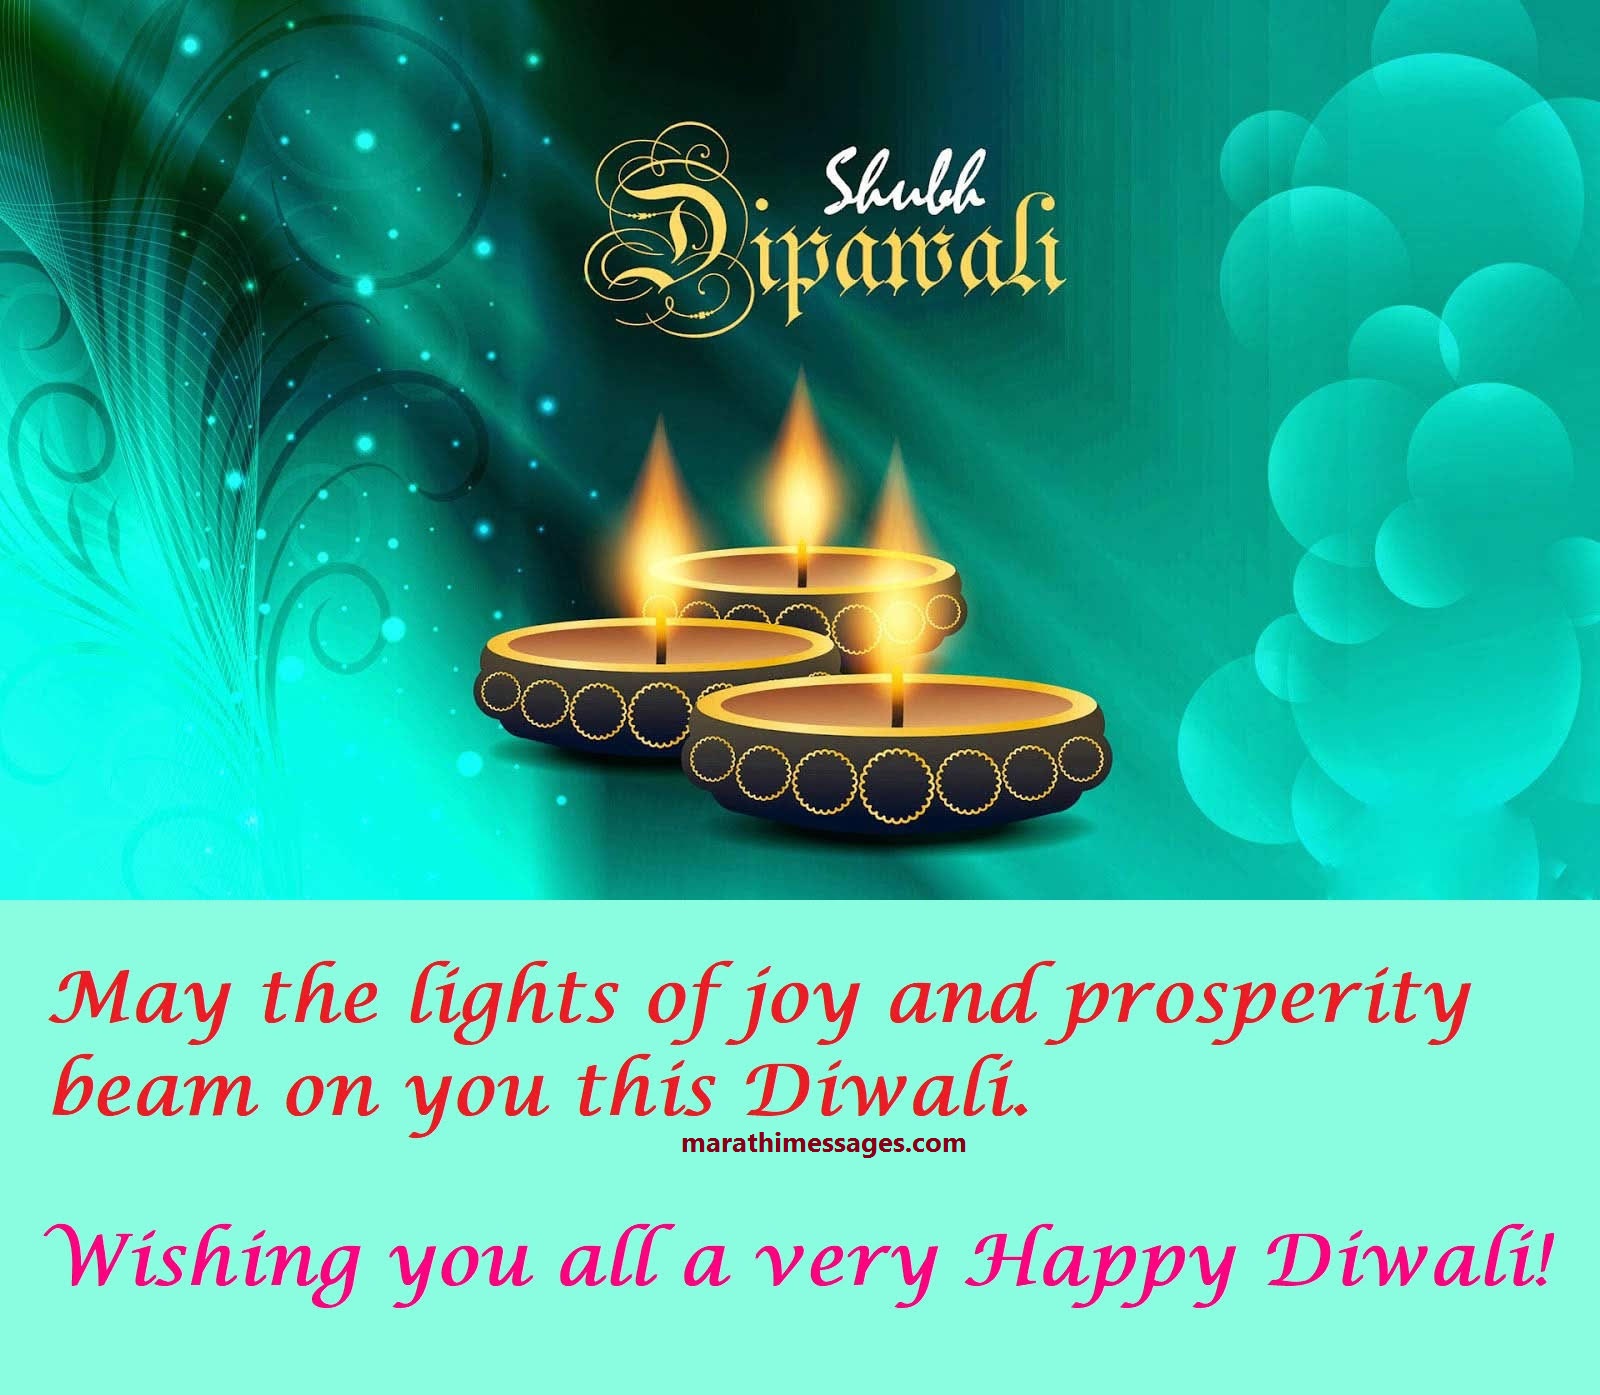 Diwali Wishes for friends, family